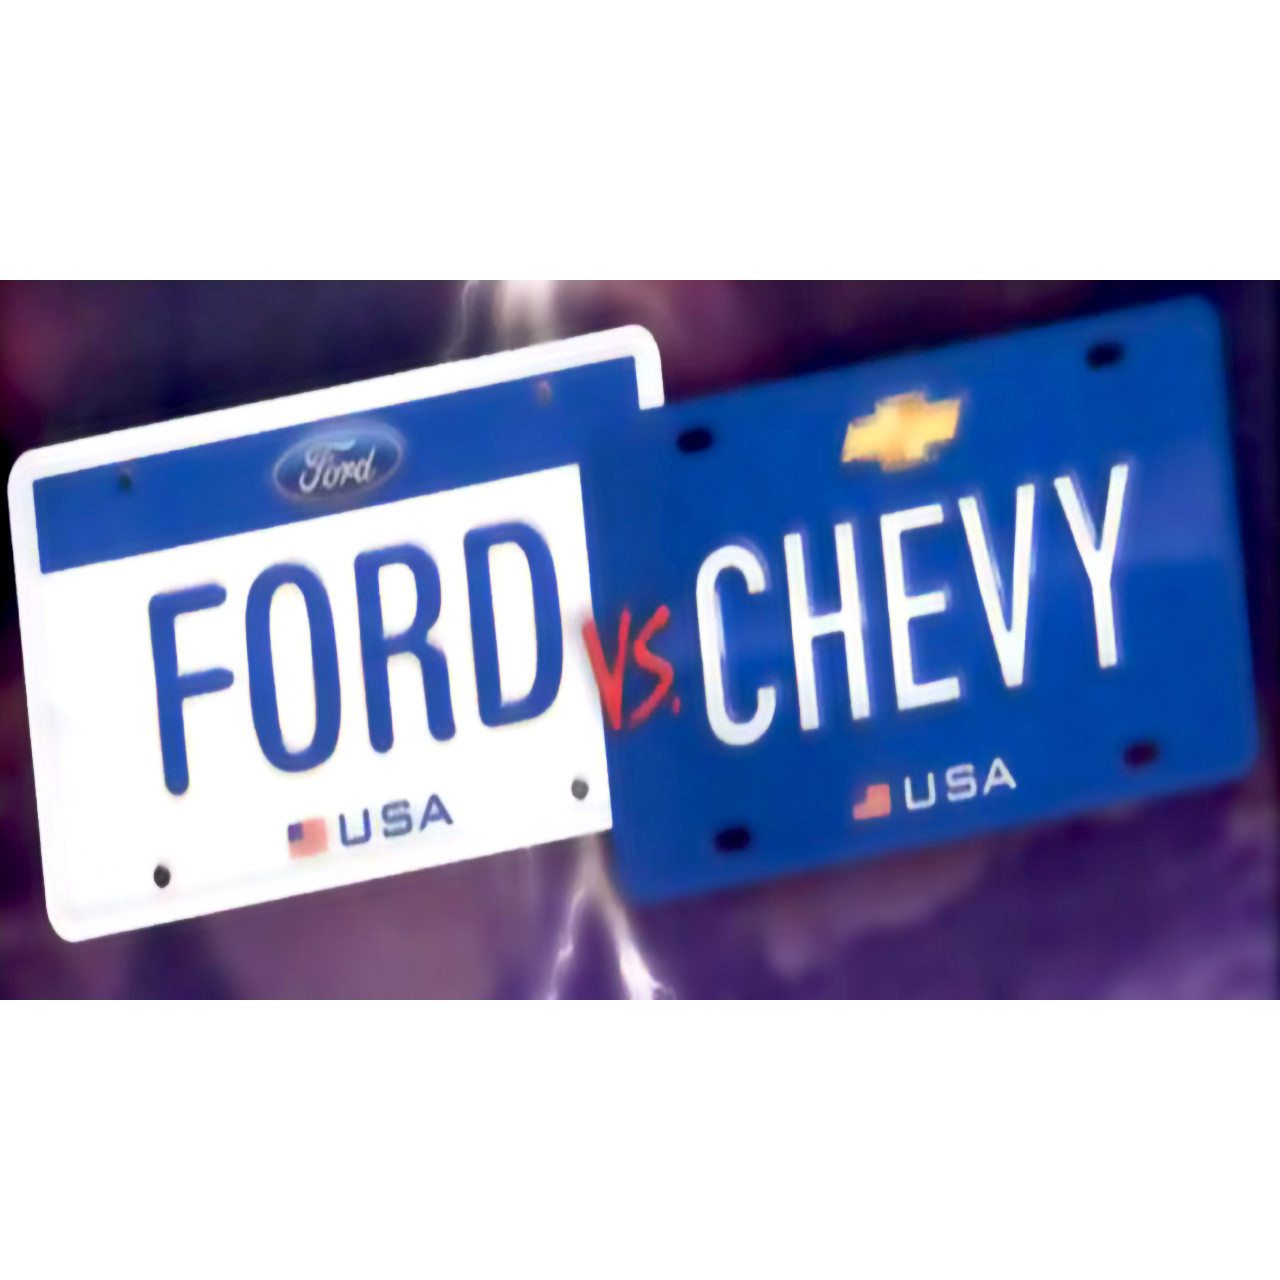 Ford vs. Chevy Sony PlayStation 2 Game